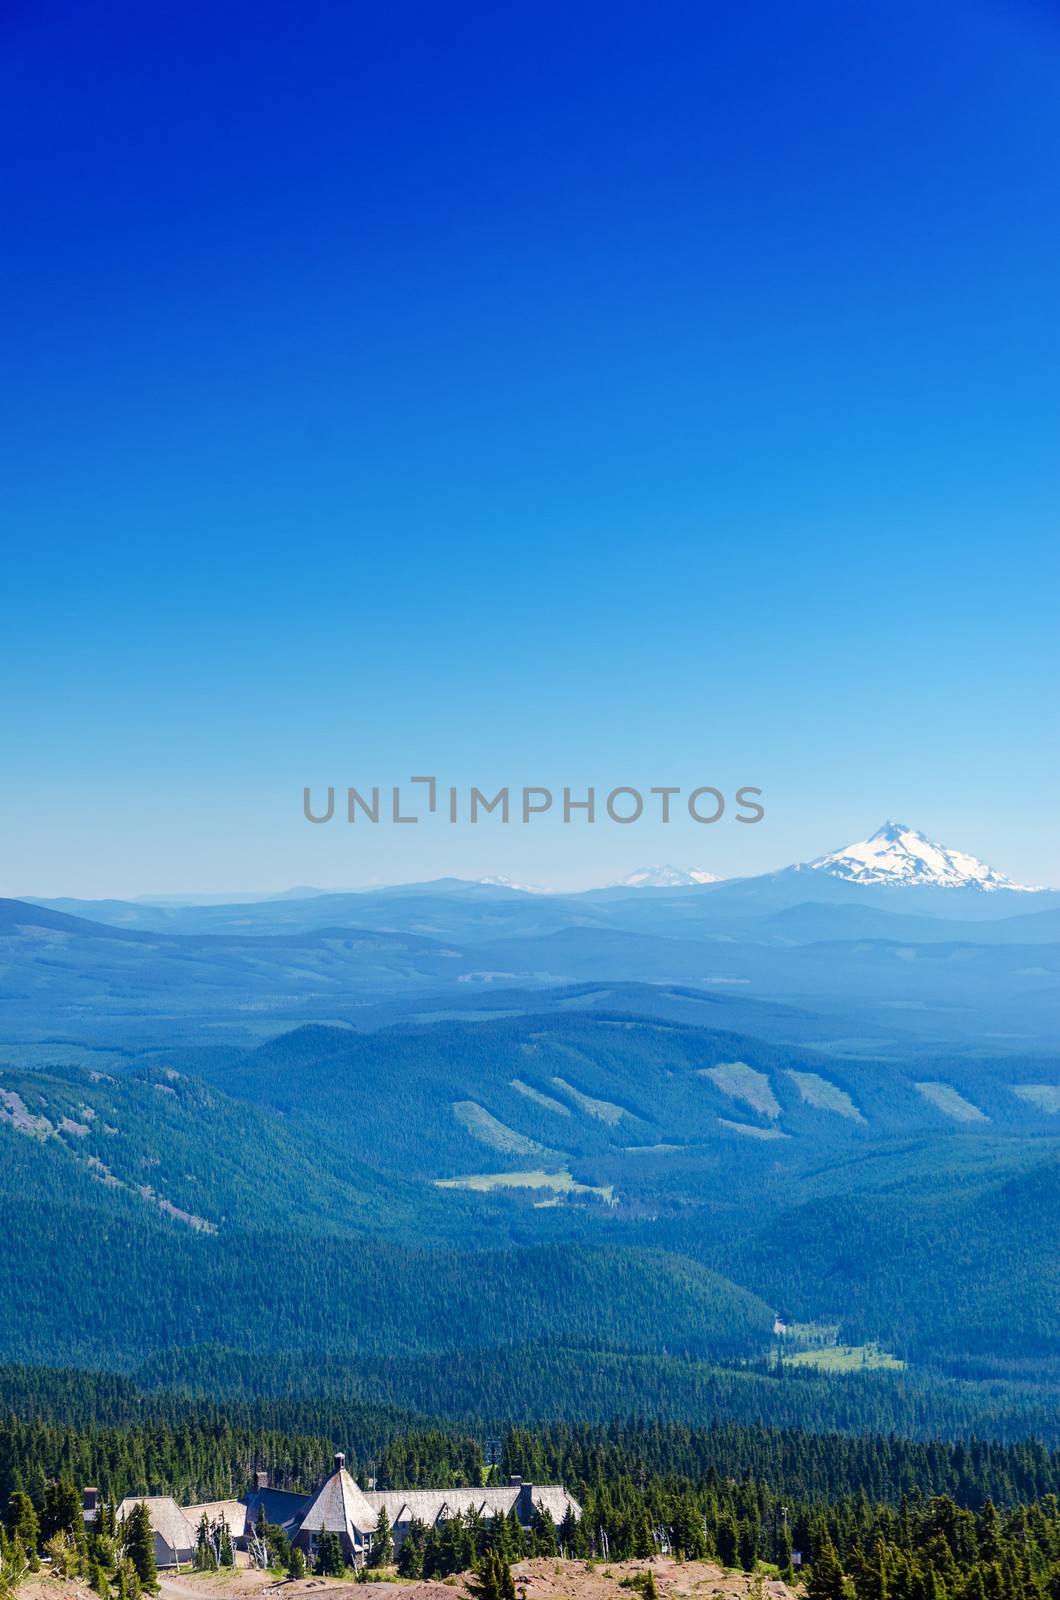 View of Mount Jefferson with Timberline Lodge at the bottom of the frame